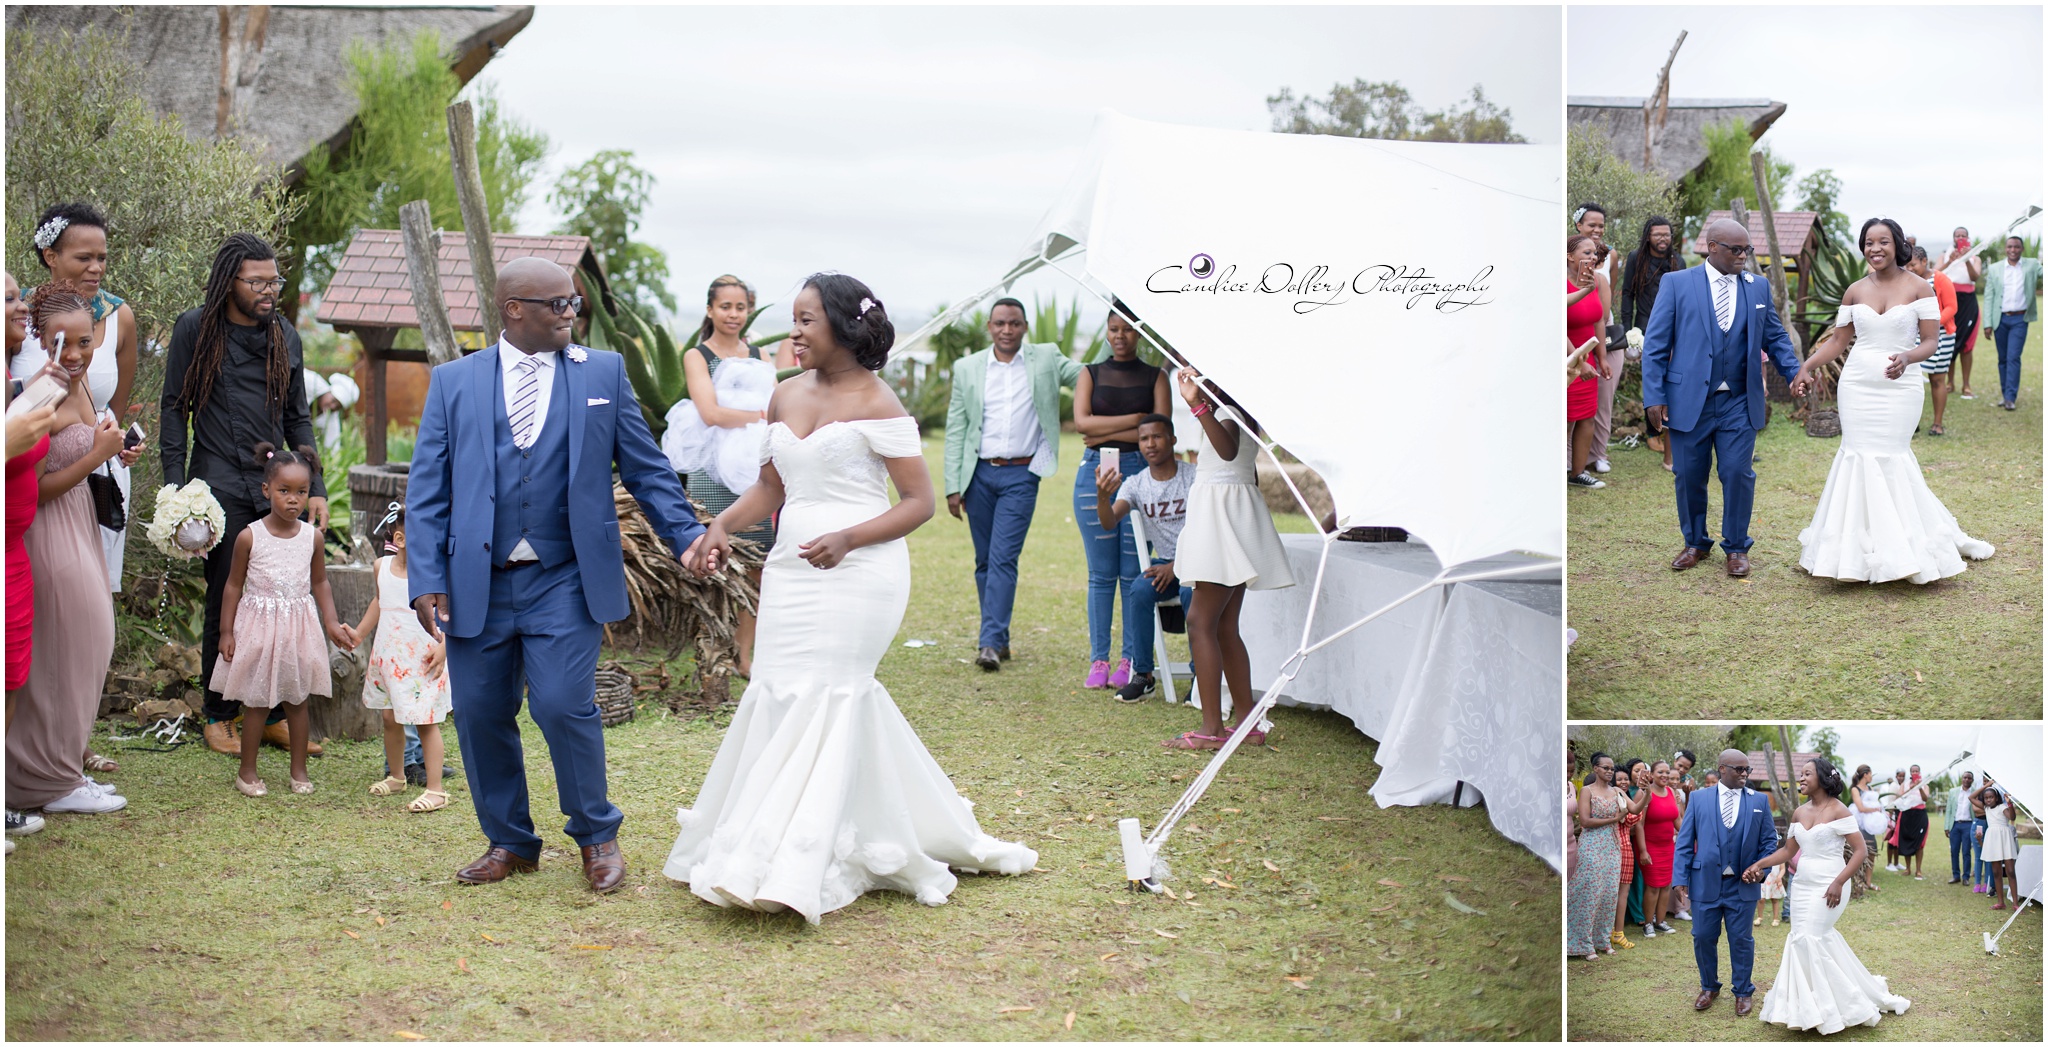 Thembi & Sabelo's Wedding - Candice Dollery Photography_8320